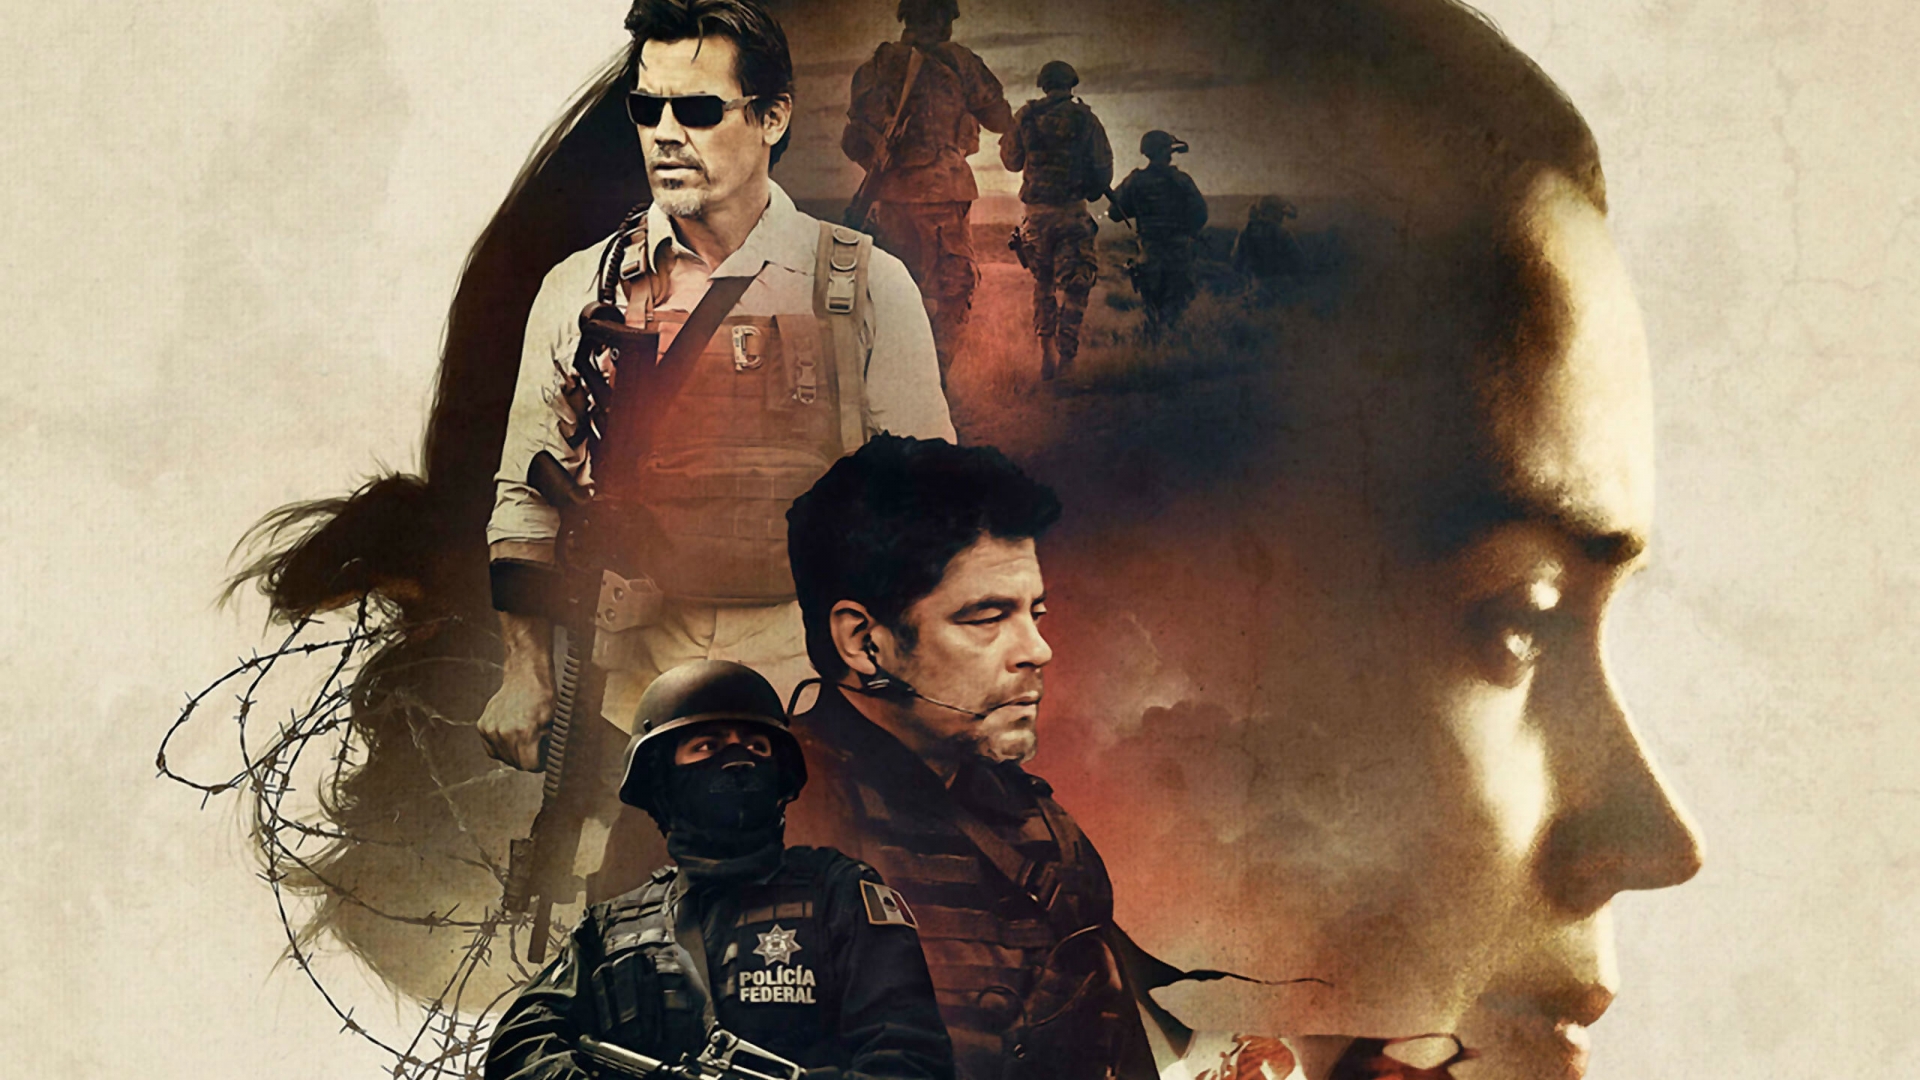 Sicario Movie Poster for 1920 x 1080 HDTV 1080p resolution